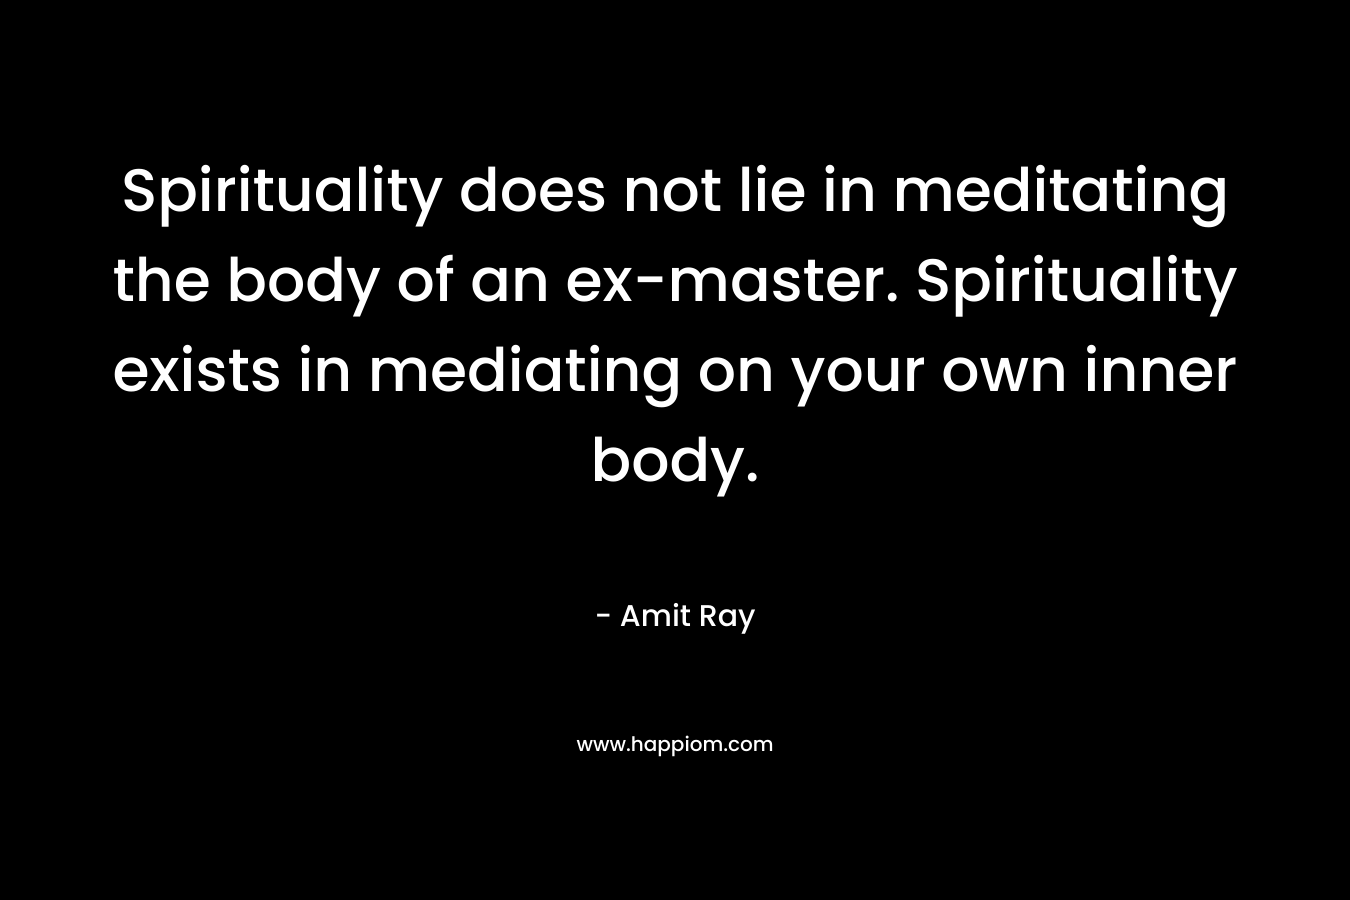 Spirituality does not lie in meditating the body of an ex-master. Spirituality exists in mediating on your own inner body. – Amit Ray